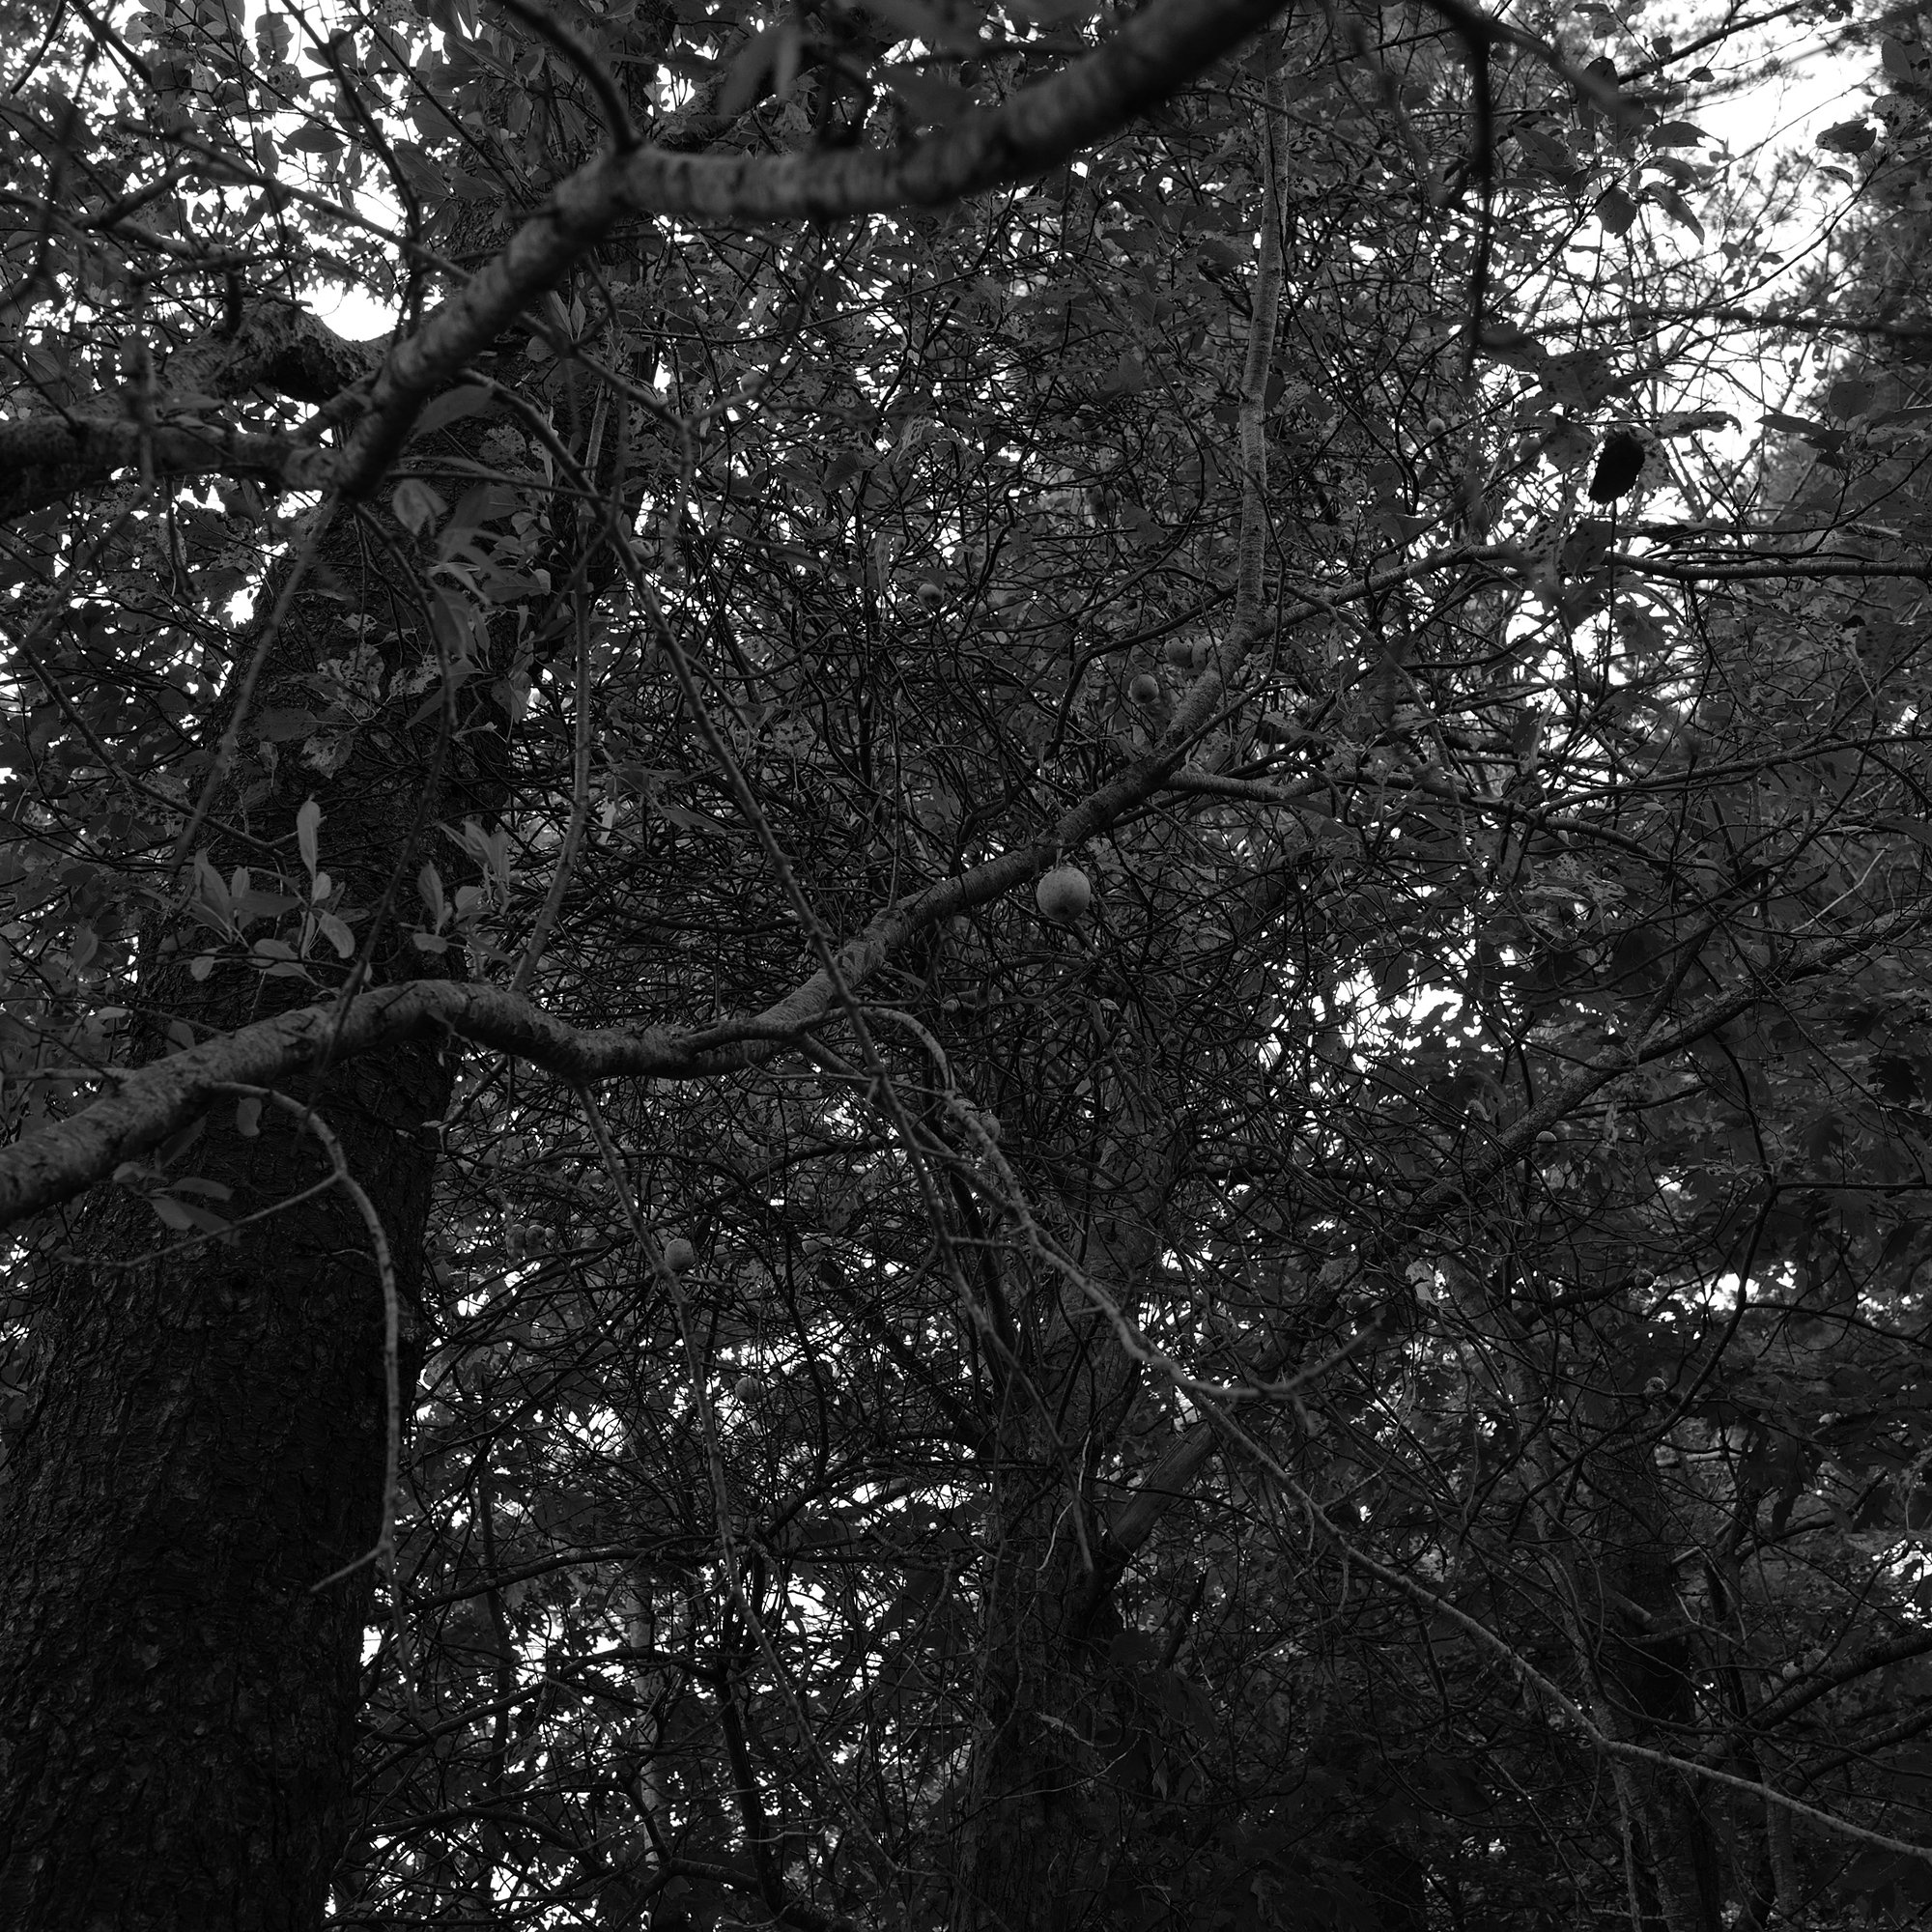 L1020231 - Cropped - BW - 2000 on Vertical.jpg